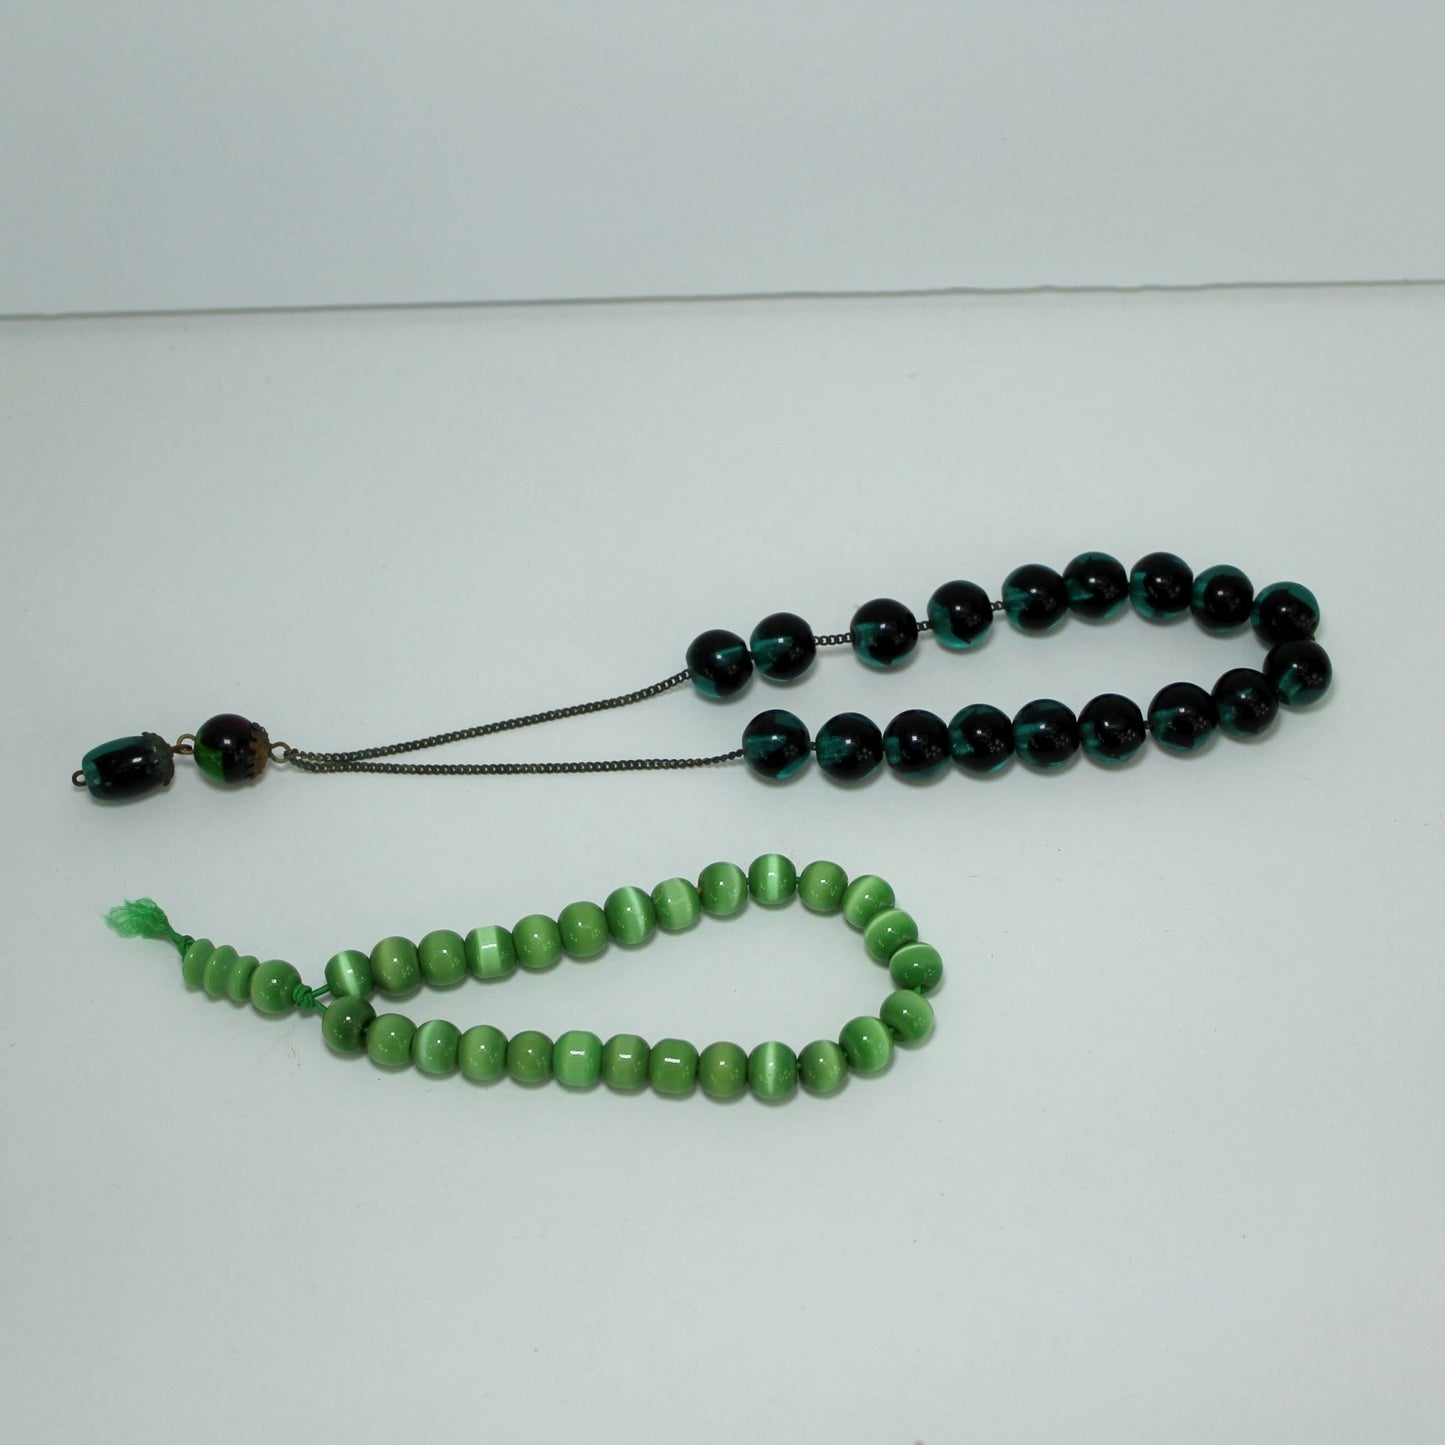 Prayer Beads Vintage on Chain Newer Cord Strung 2 Sets